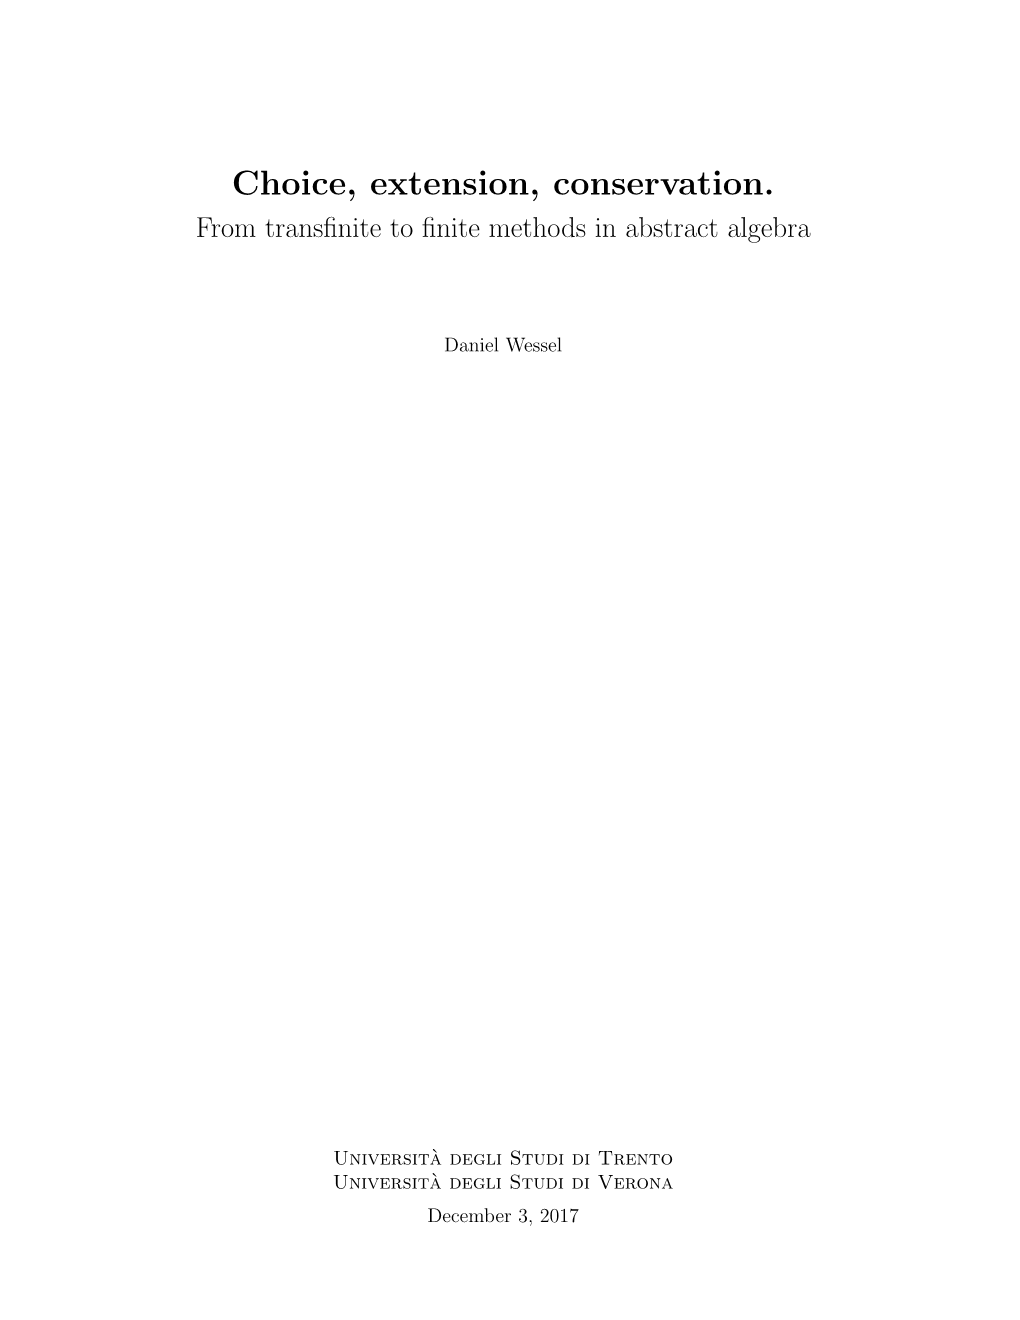 Choice, Extension, Conservation. from Transﬁnite to ﬁnite Methods in Abstract Algebra